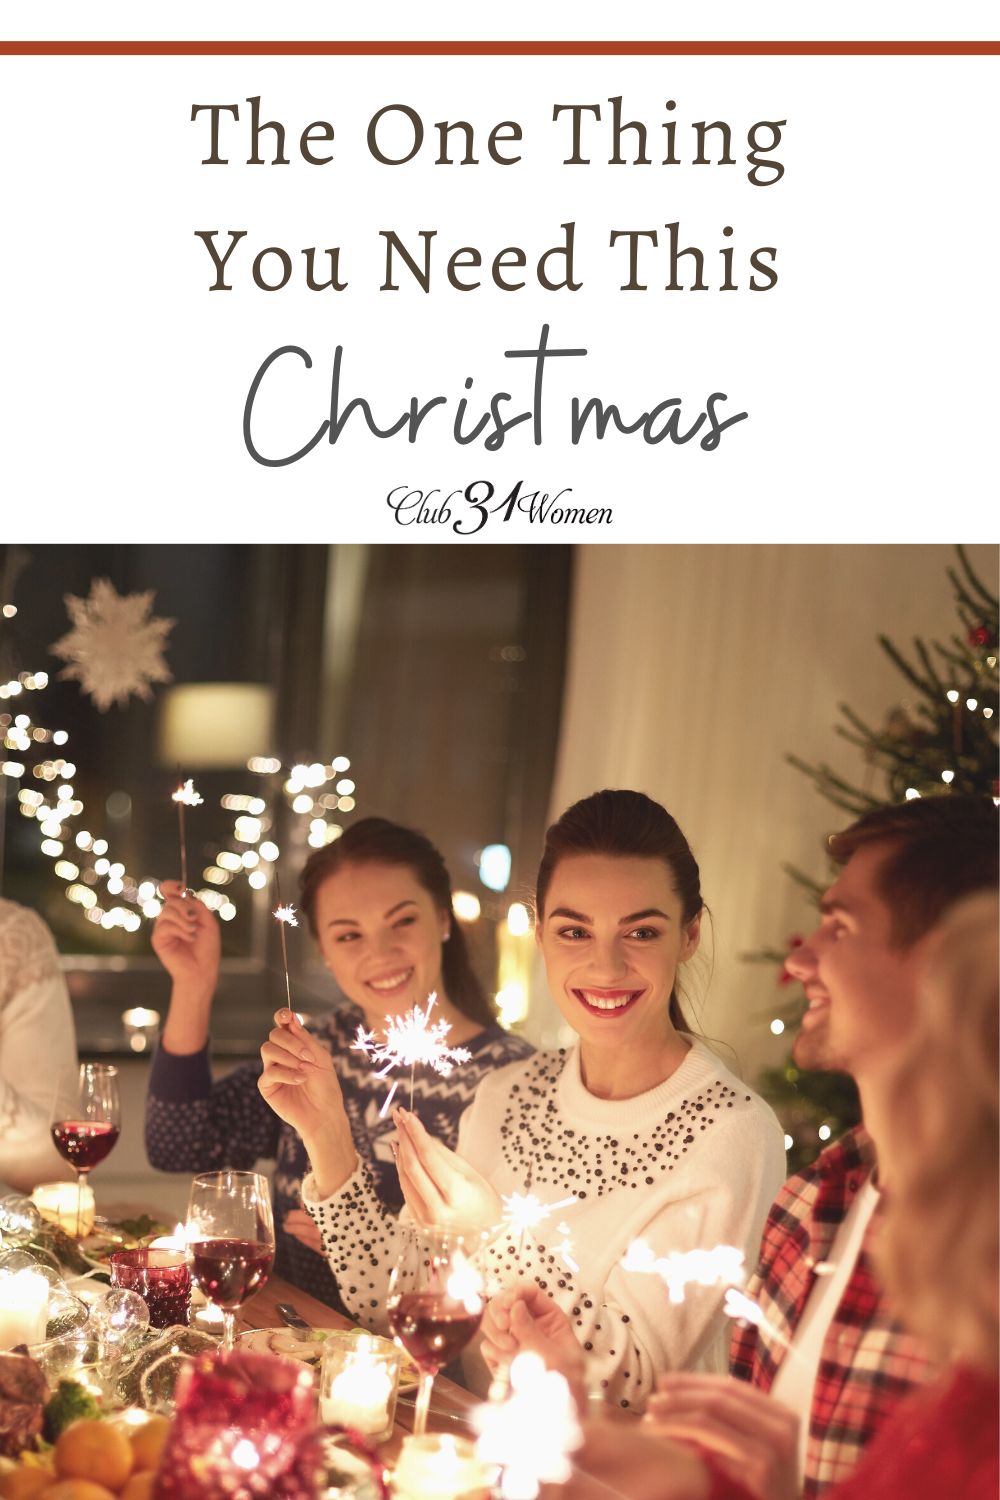 Amid the hustle for gifts, trimming the tree, and baking treats, let us not forget the one thing we need this Christmas. via @Club31Women